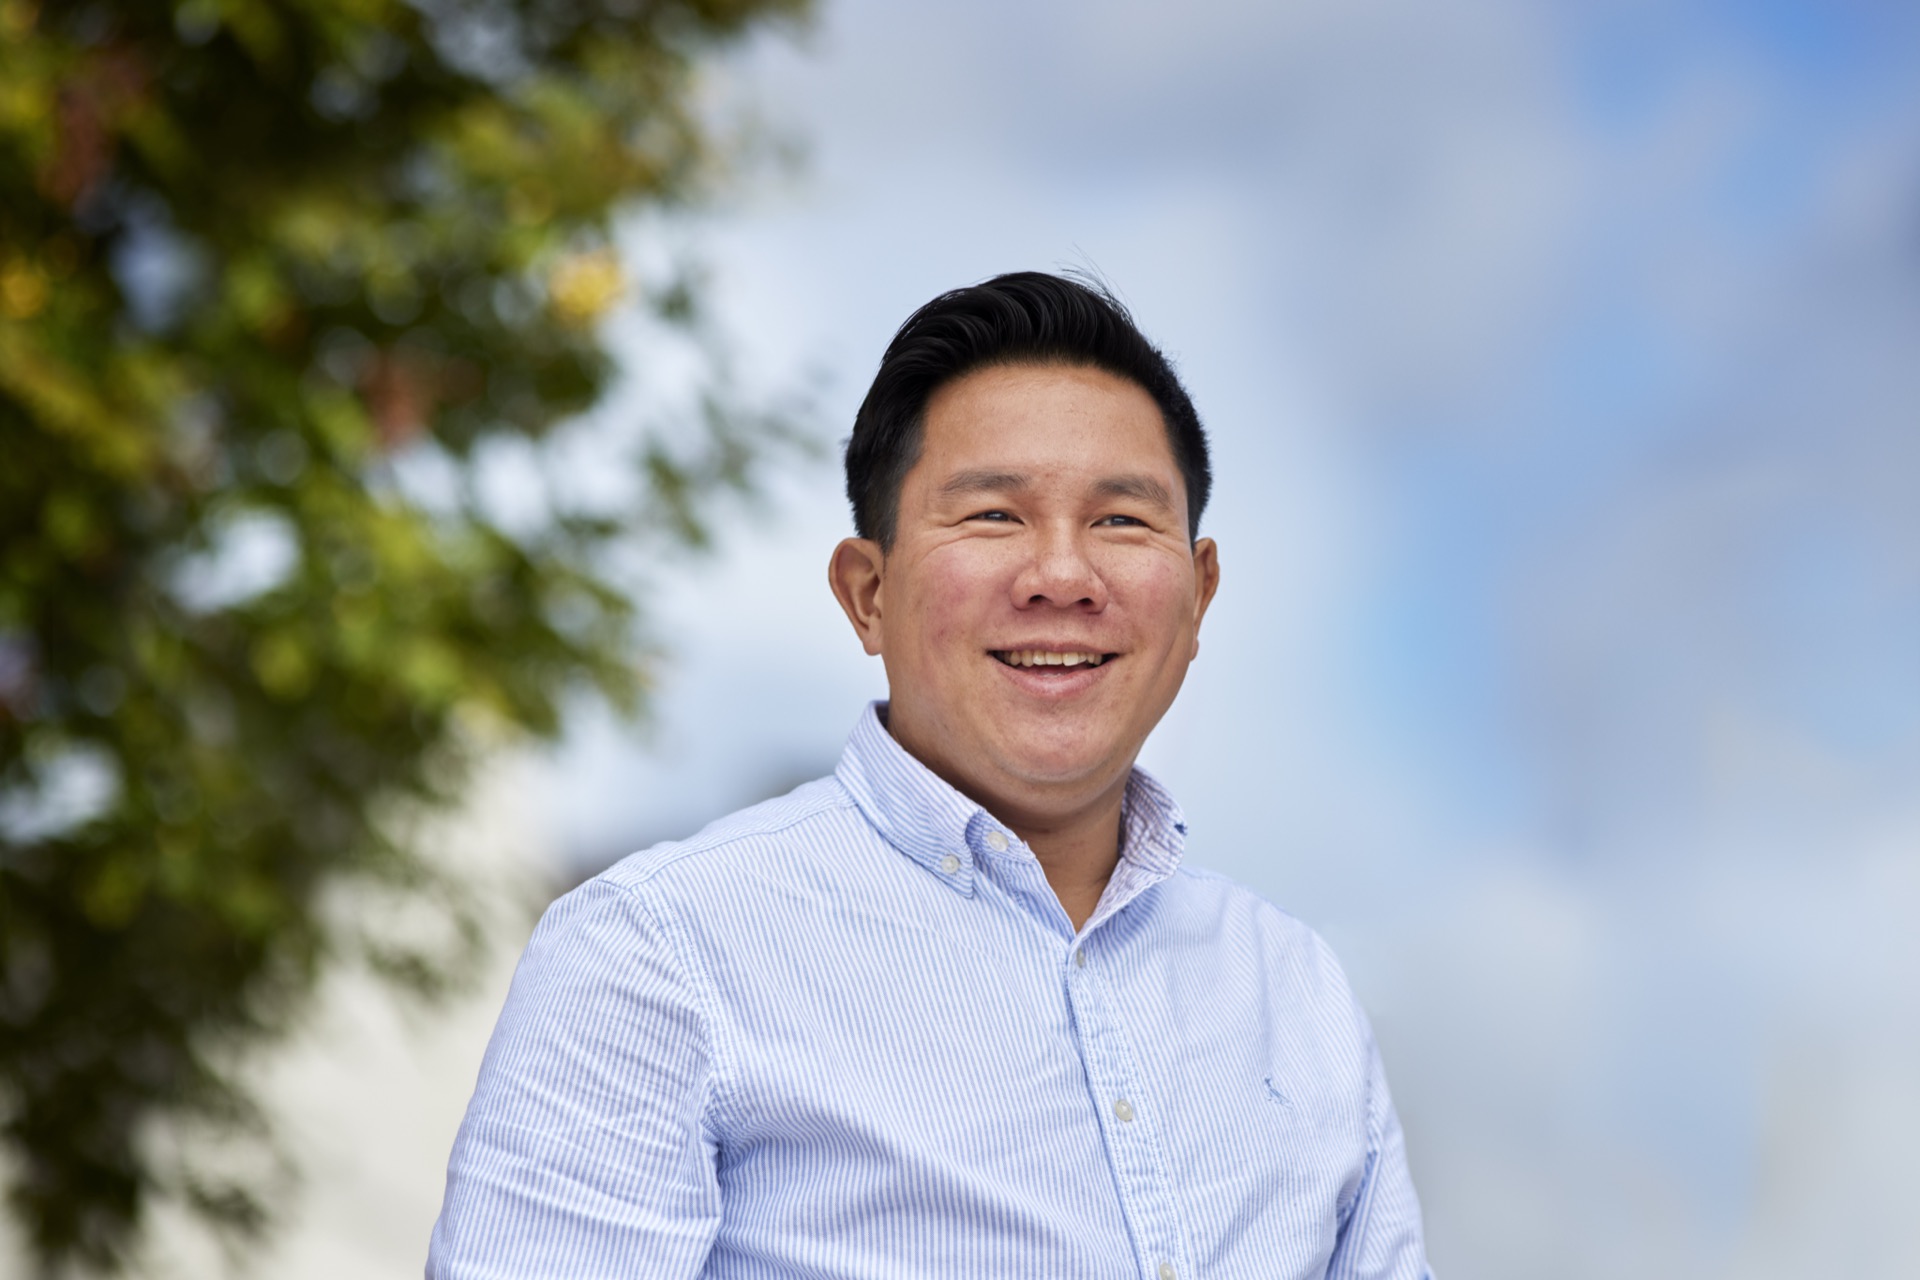 Infectiously positive new arrival: Trevor Yong, Business Development Director